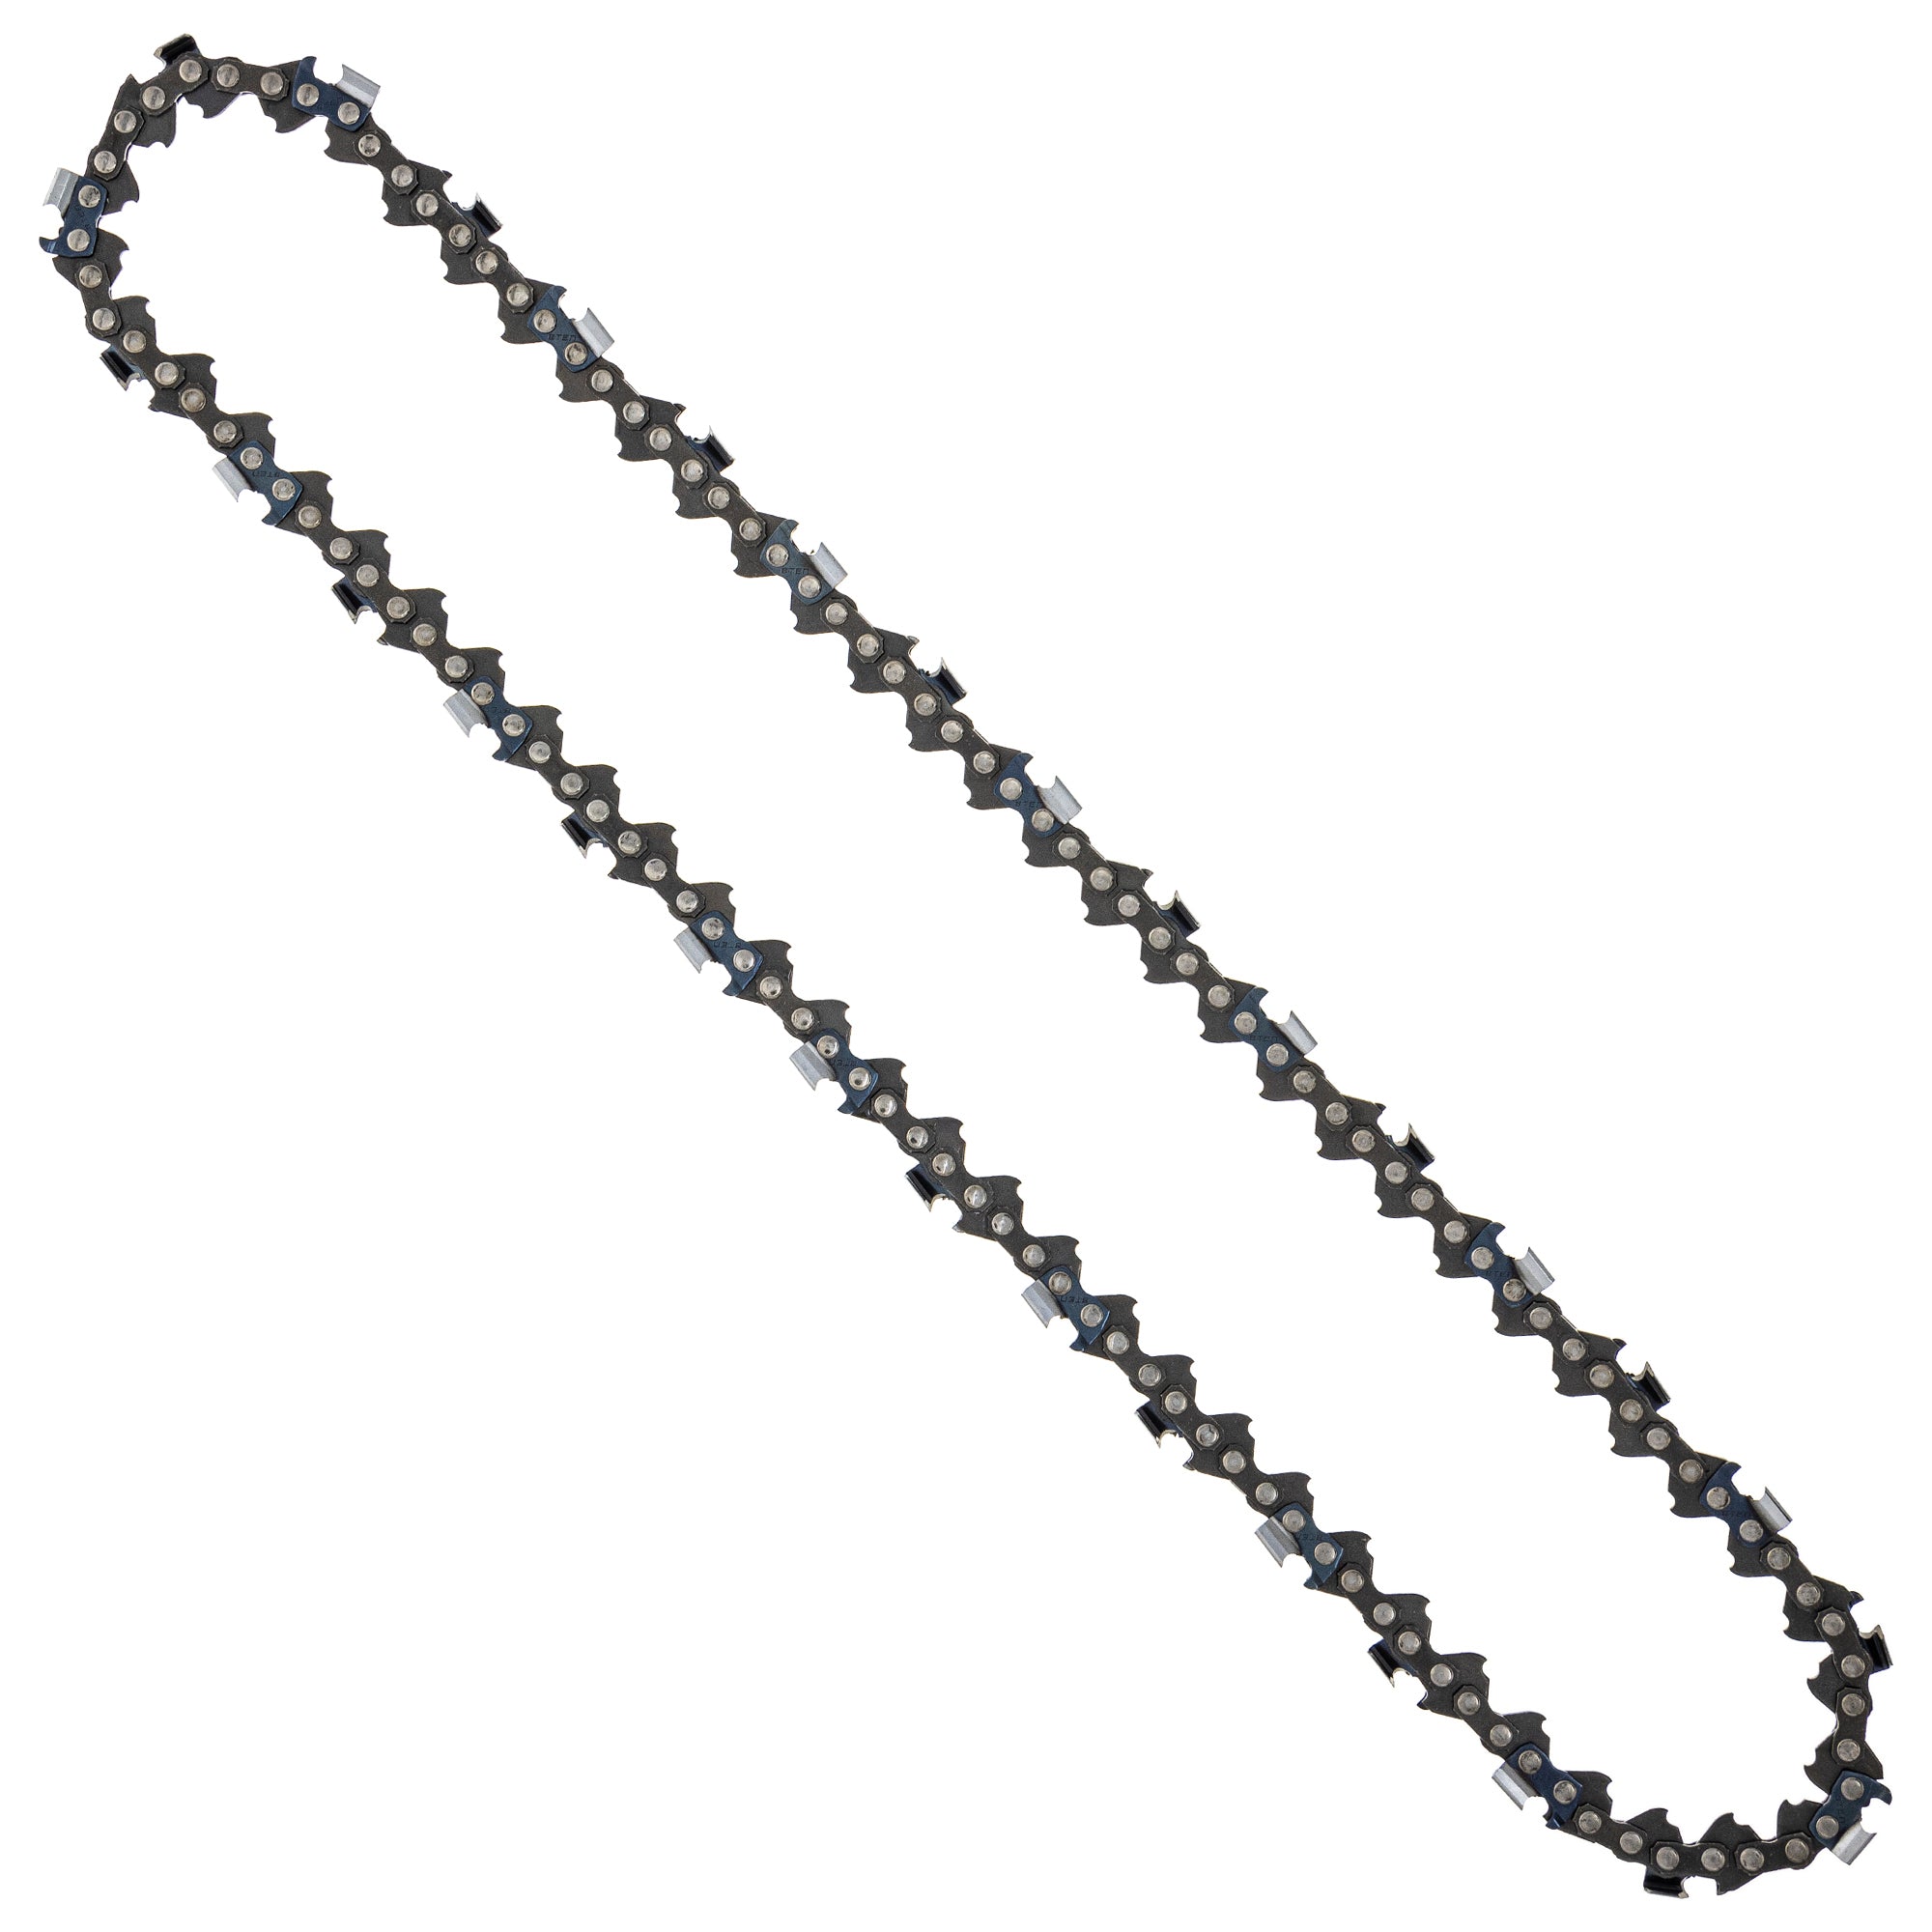 8TEN 810-CCC2399H Chain 5-Pack for zOTHER Oregon MS 25 070 025